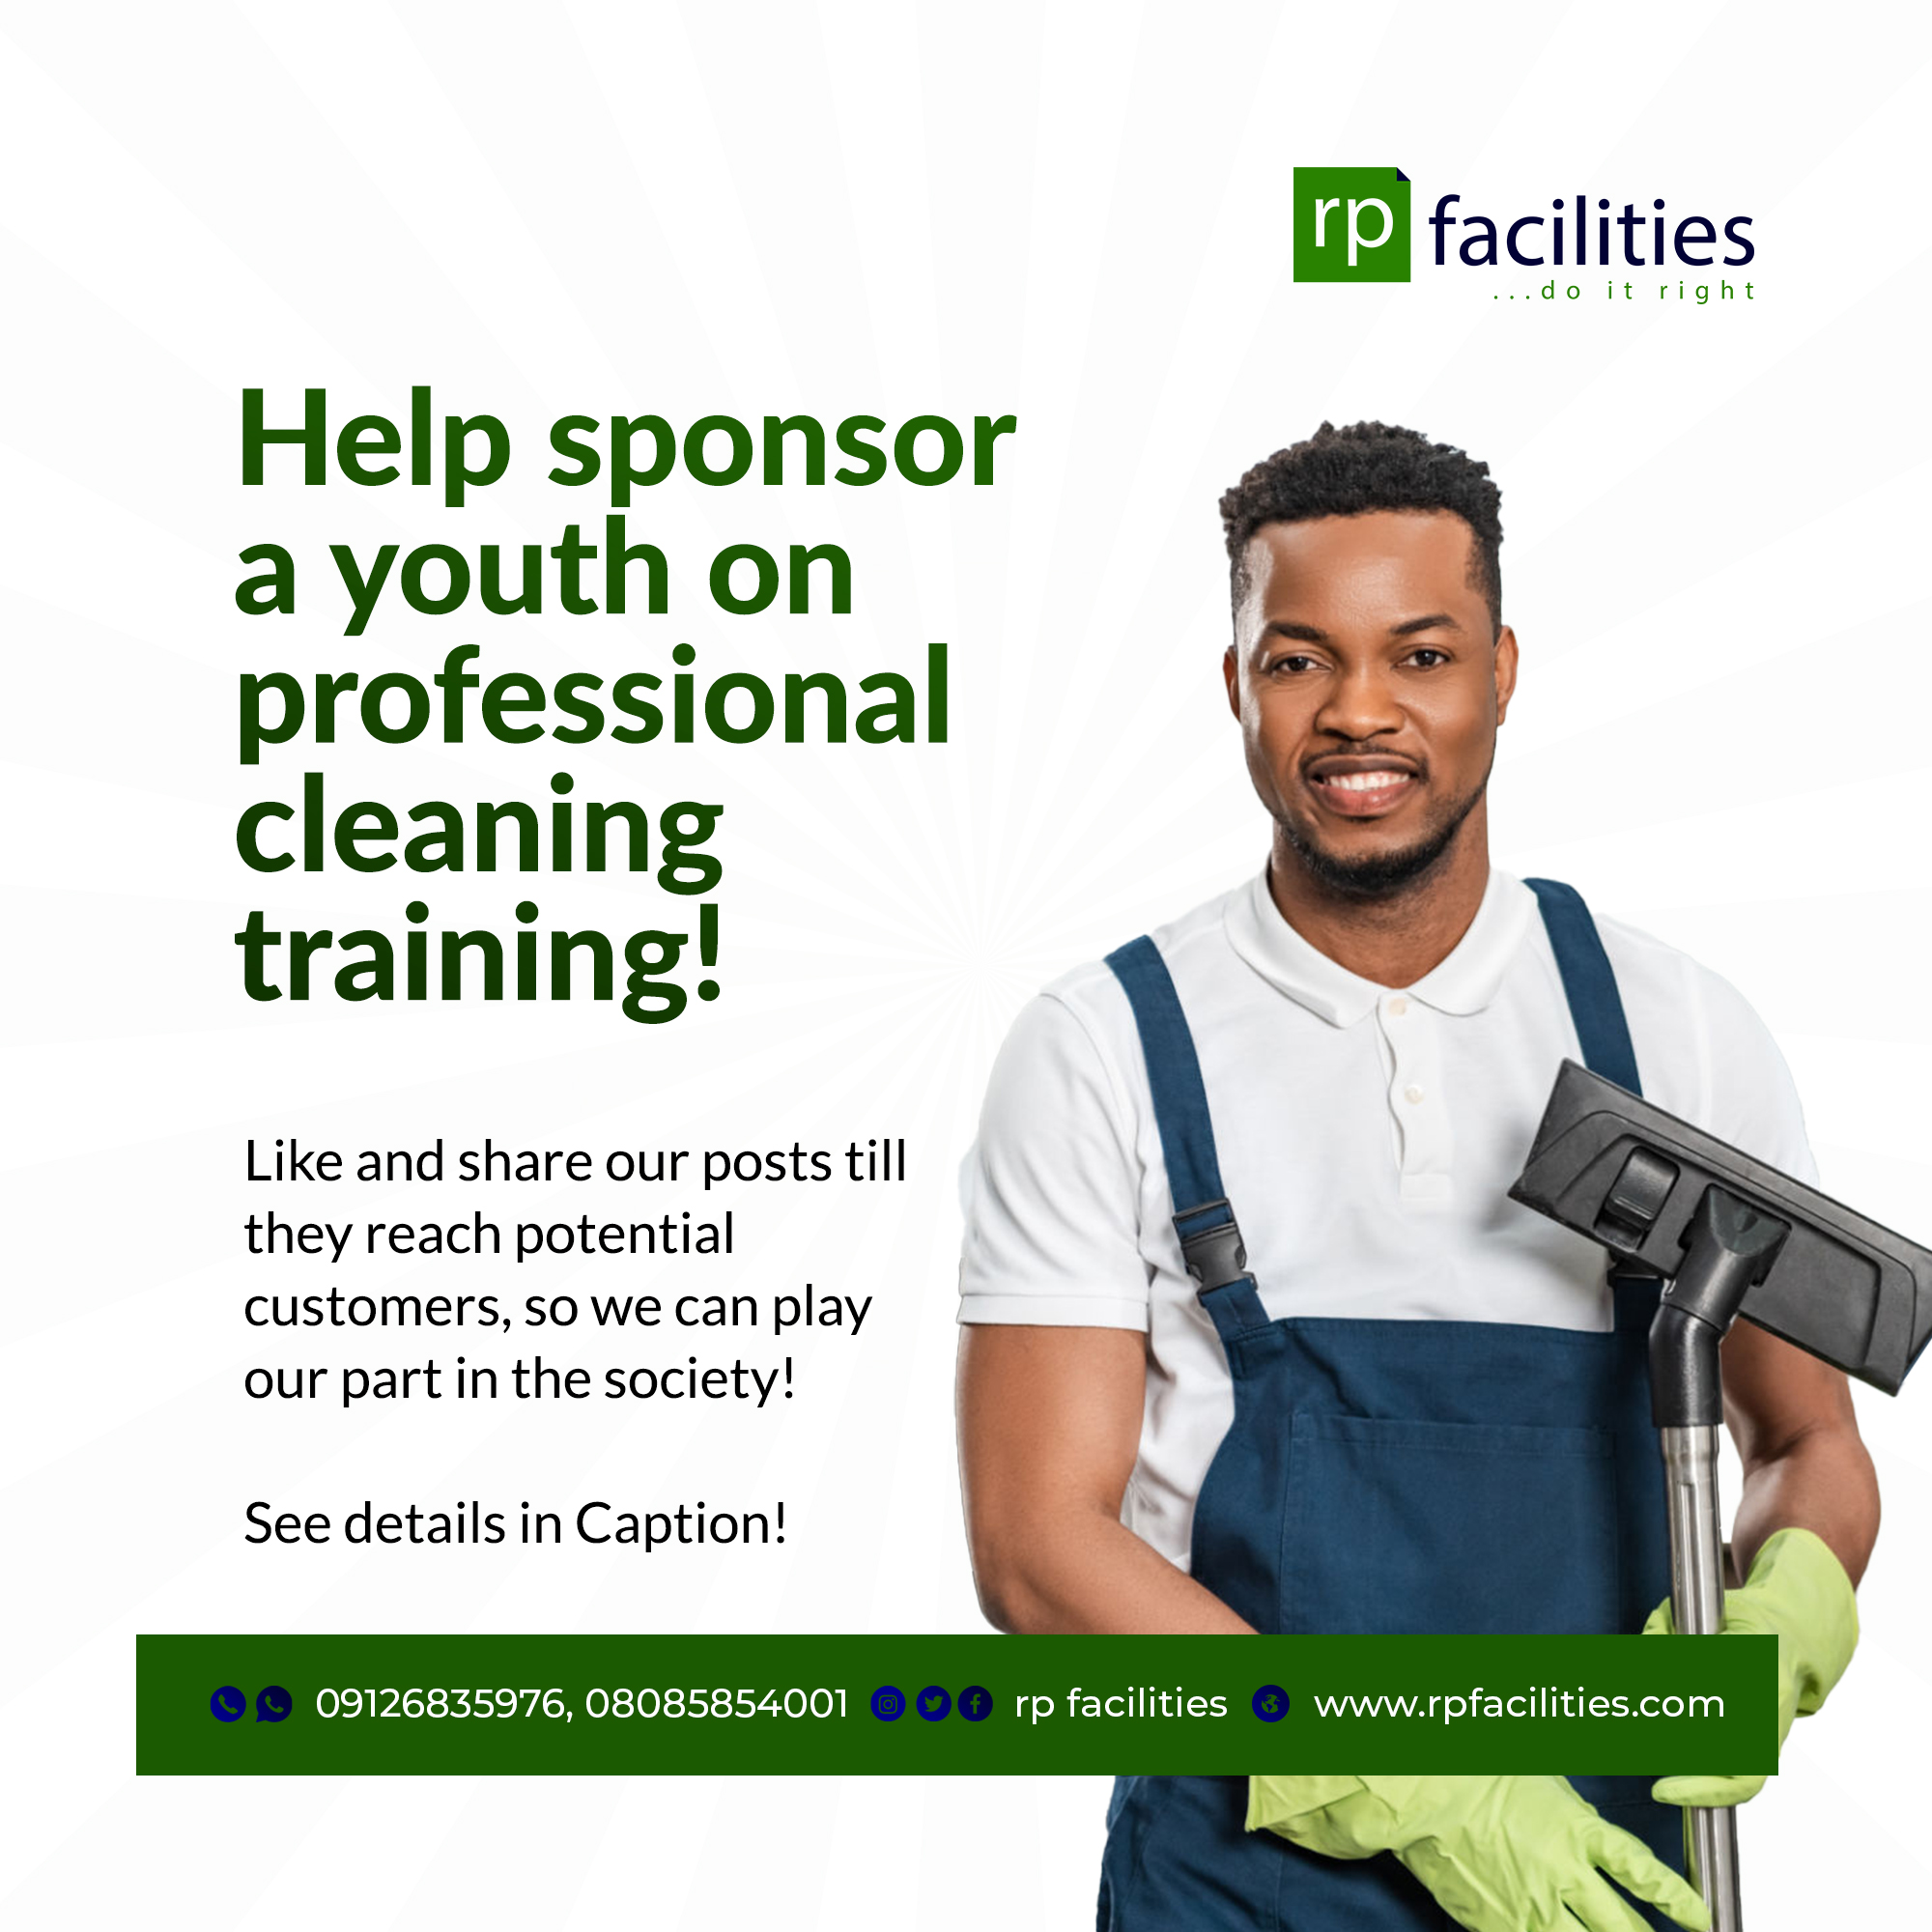 facilities

Help sponsor
a youth on
professional
cleaning
training!

 
  
 
   
    
   
   
 

Like and share our posts till
they reach potential
customers, so we can play
our part in the society!

See details in Caption!

09126835976, 08085854001 rp facilities www.rpfacilities.com